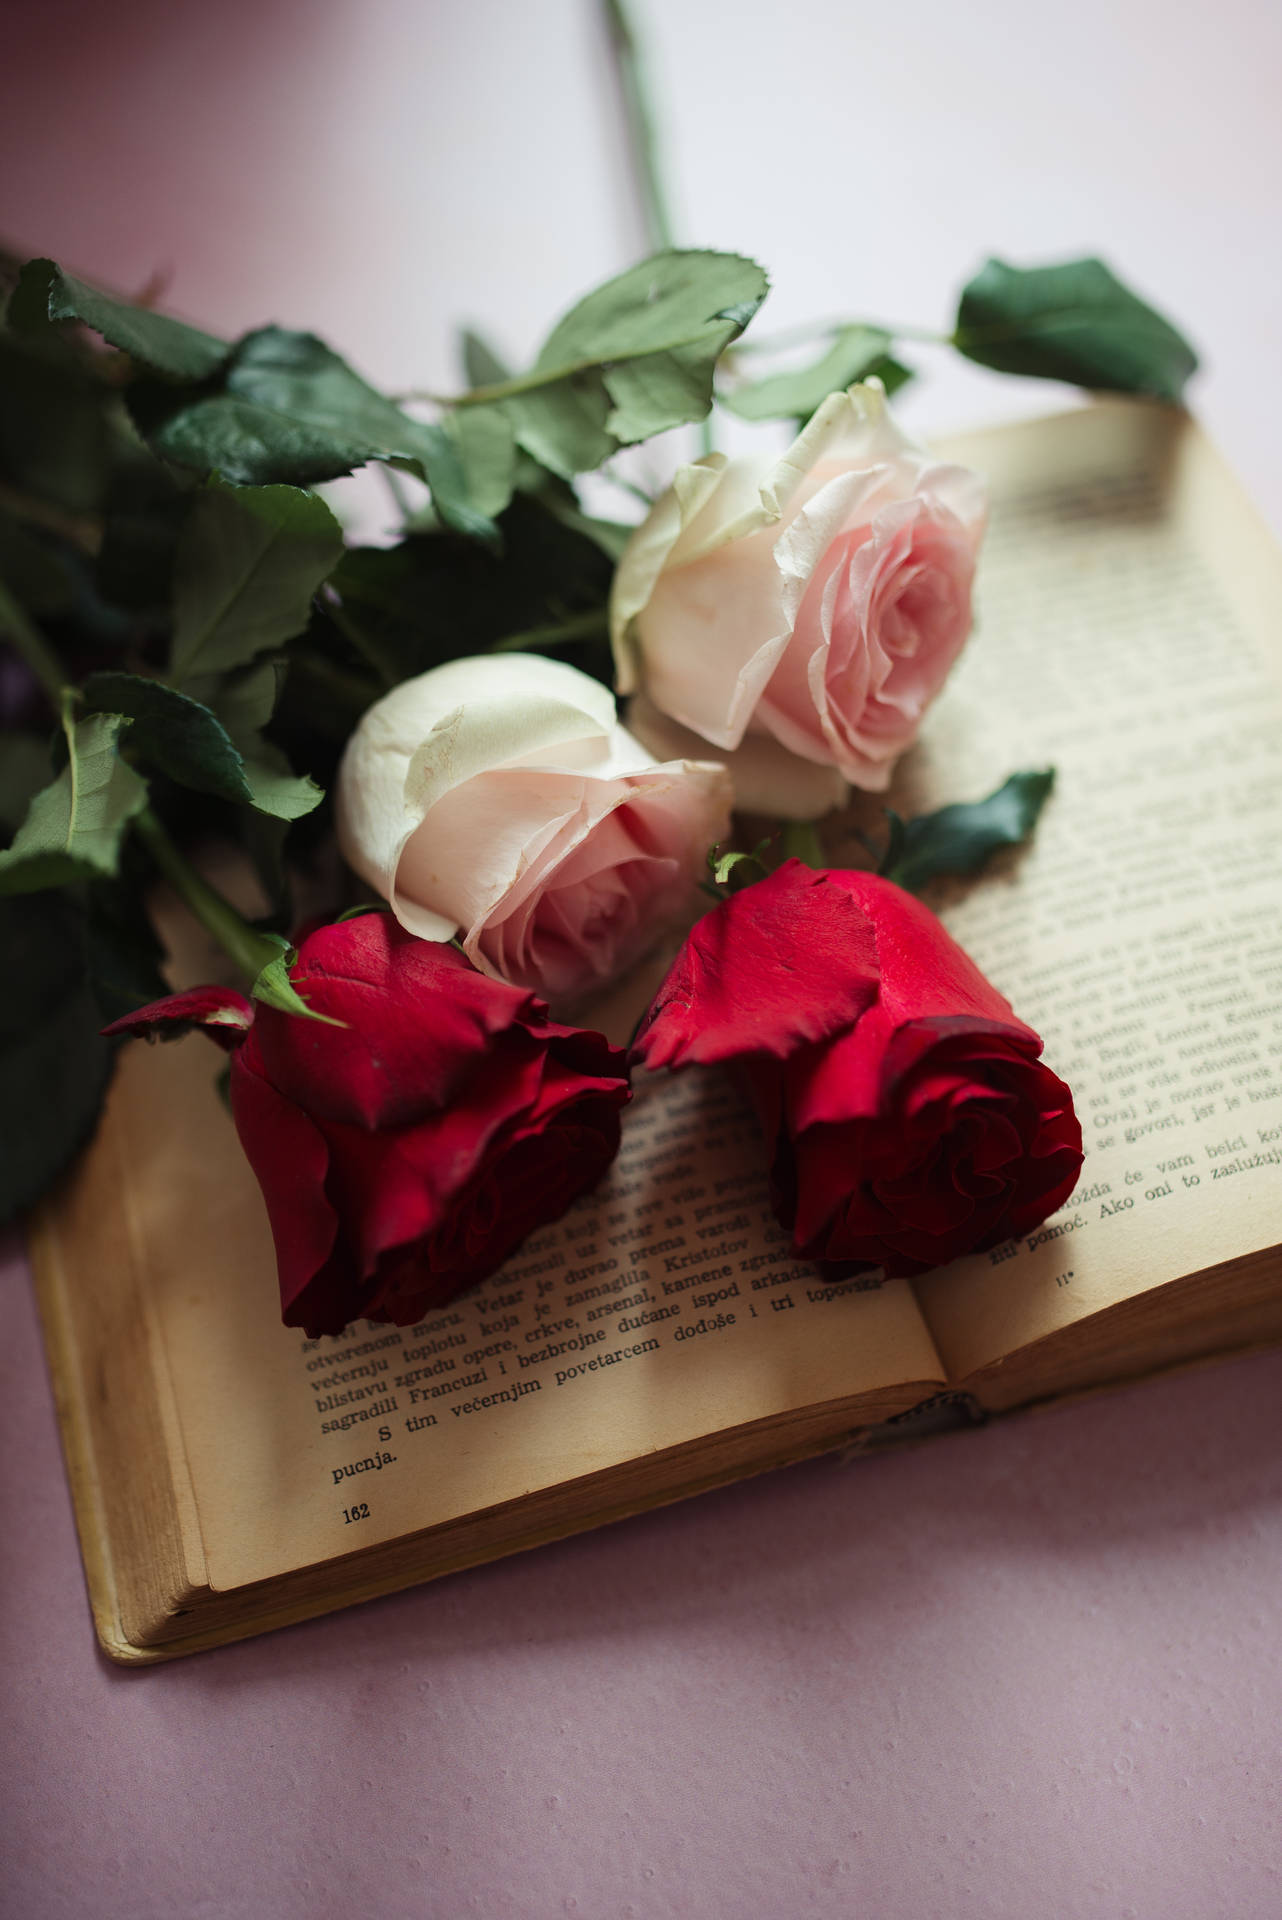 Aesthetic Rose Flowers On A Book Background